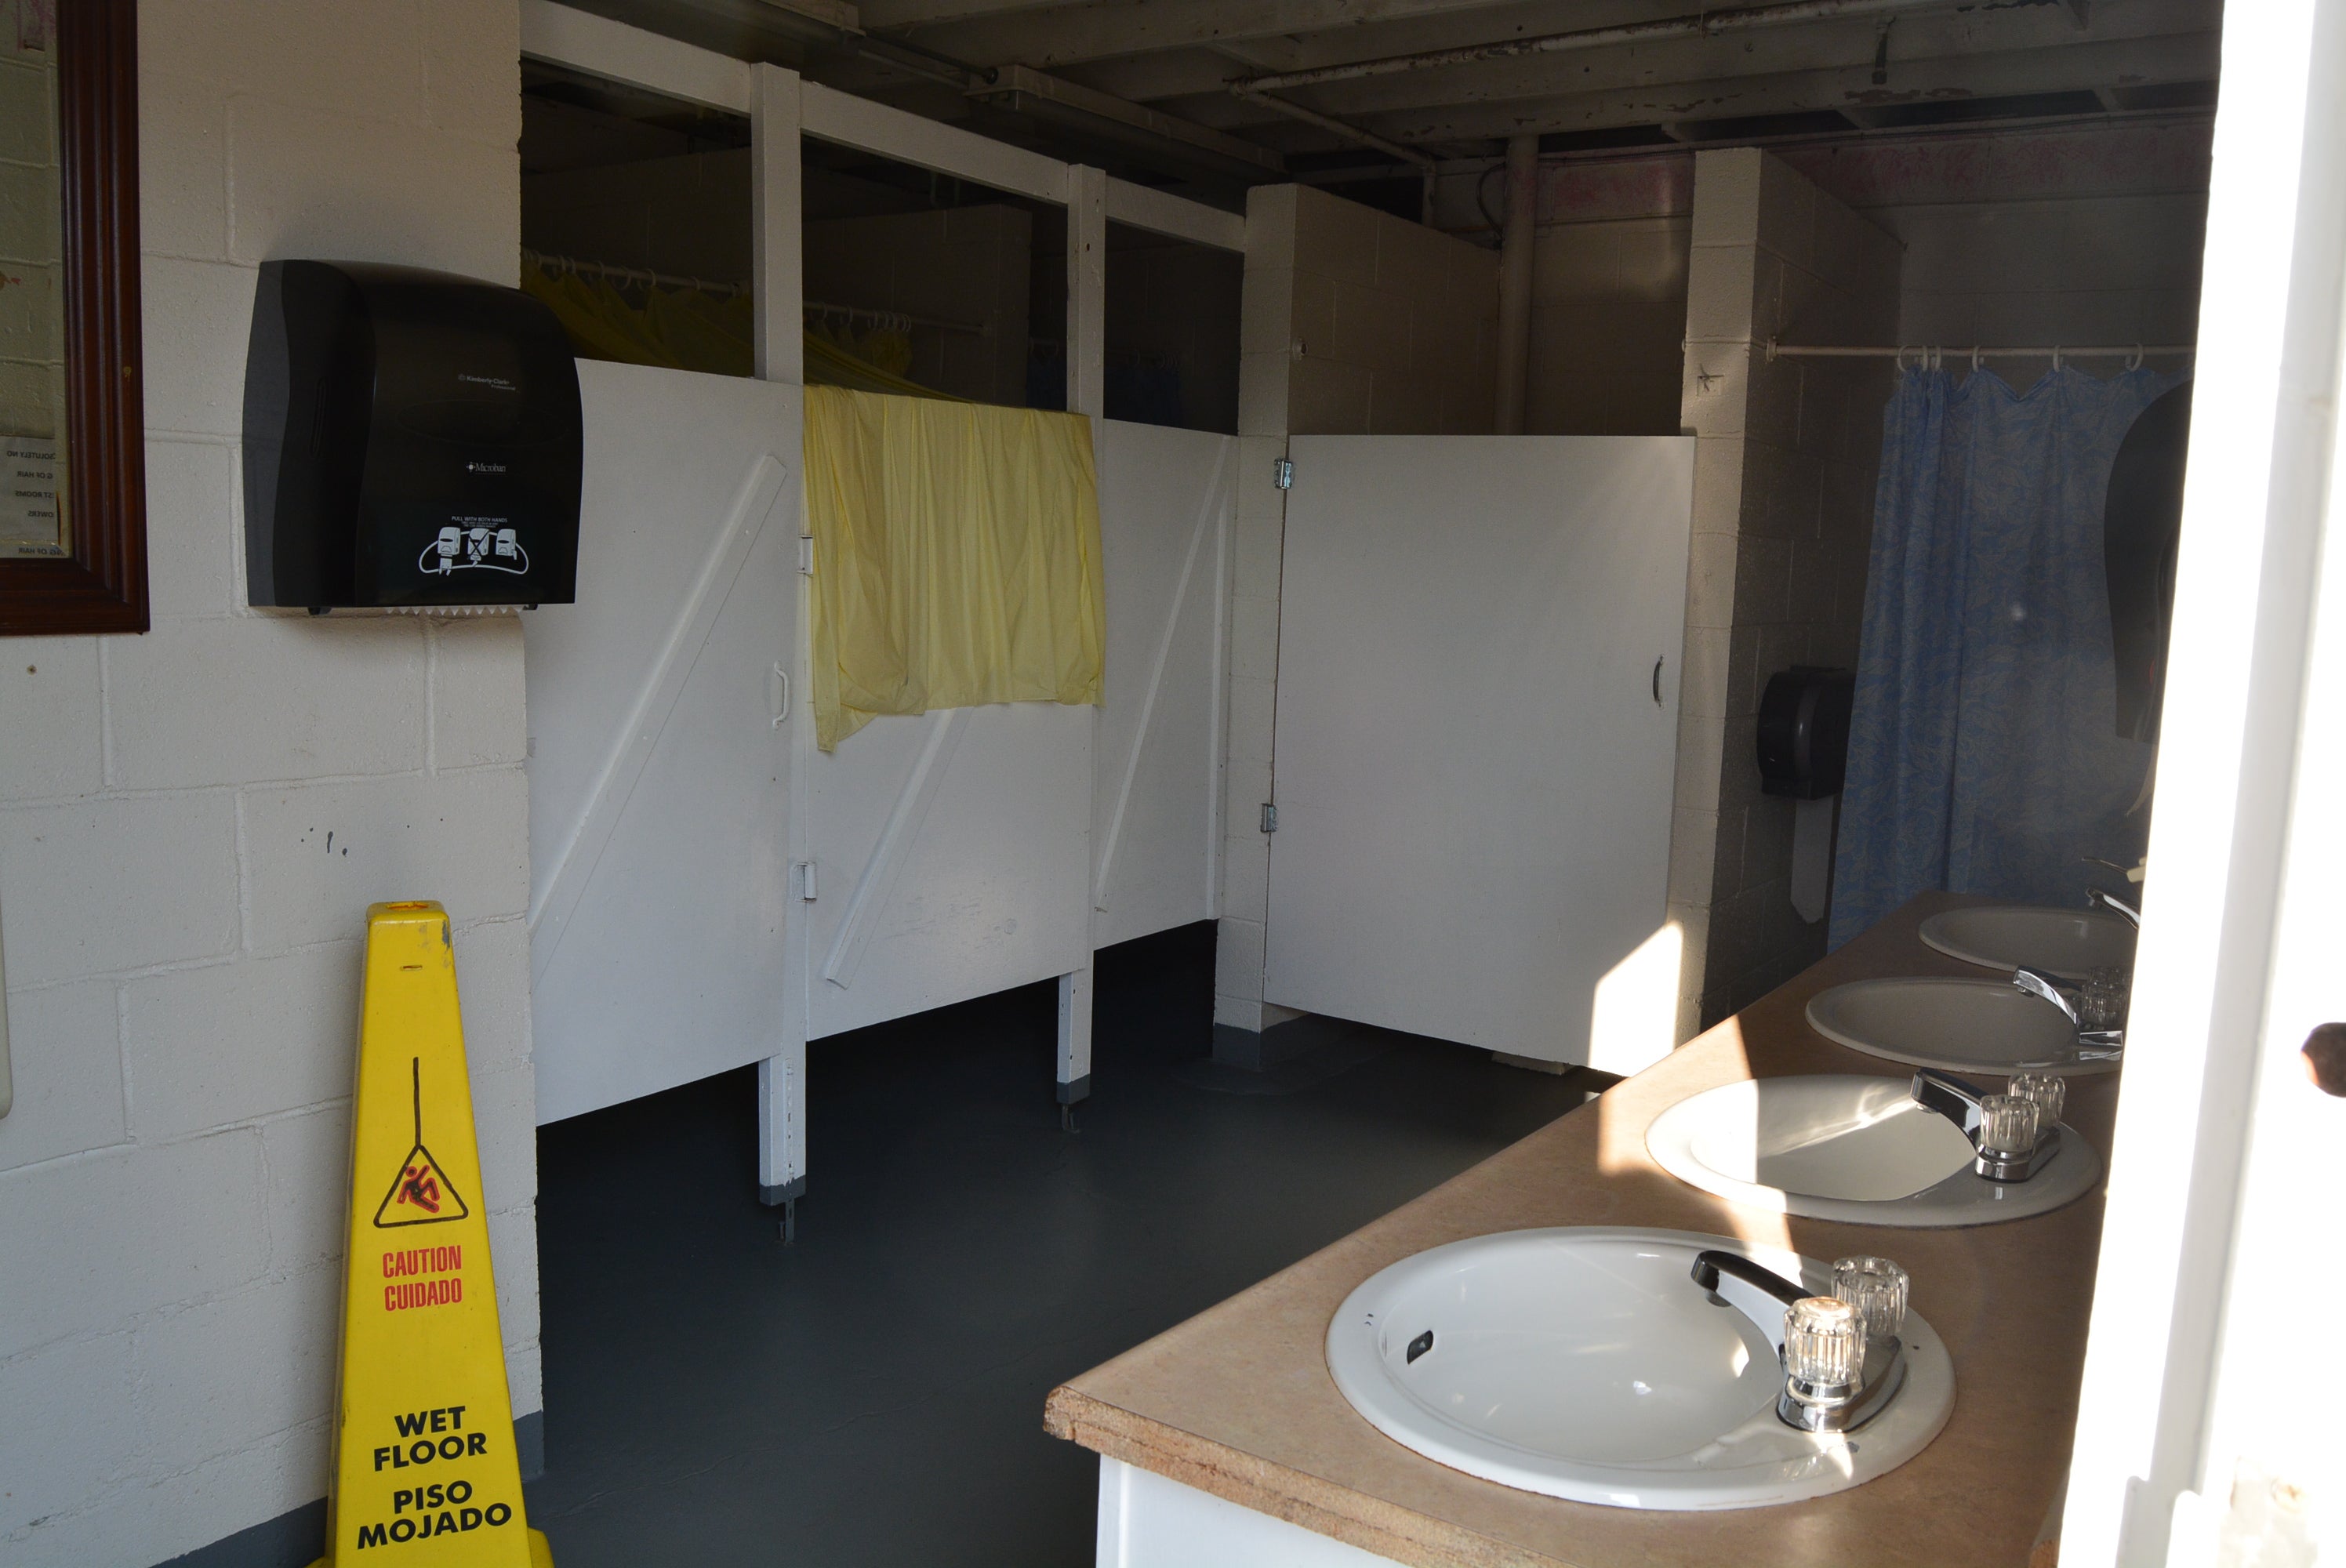 Bathrooms are located in the middle of the campground which is not convenient for those camped in the tent section.